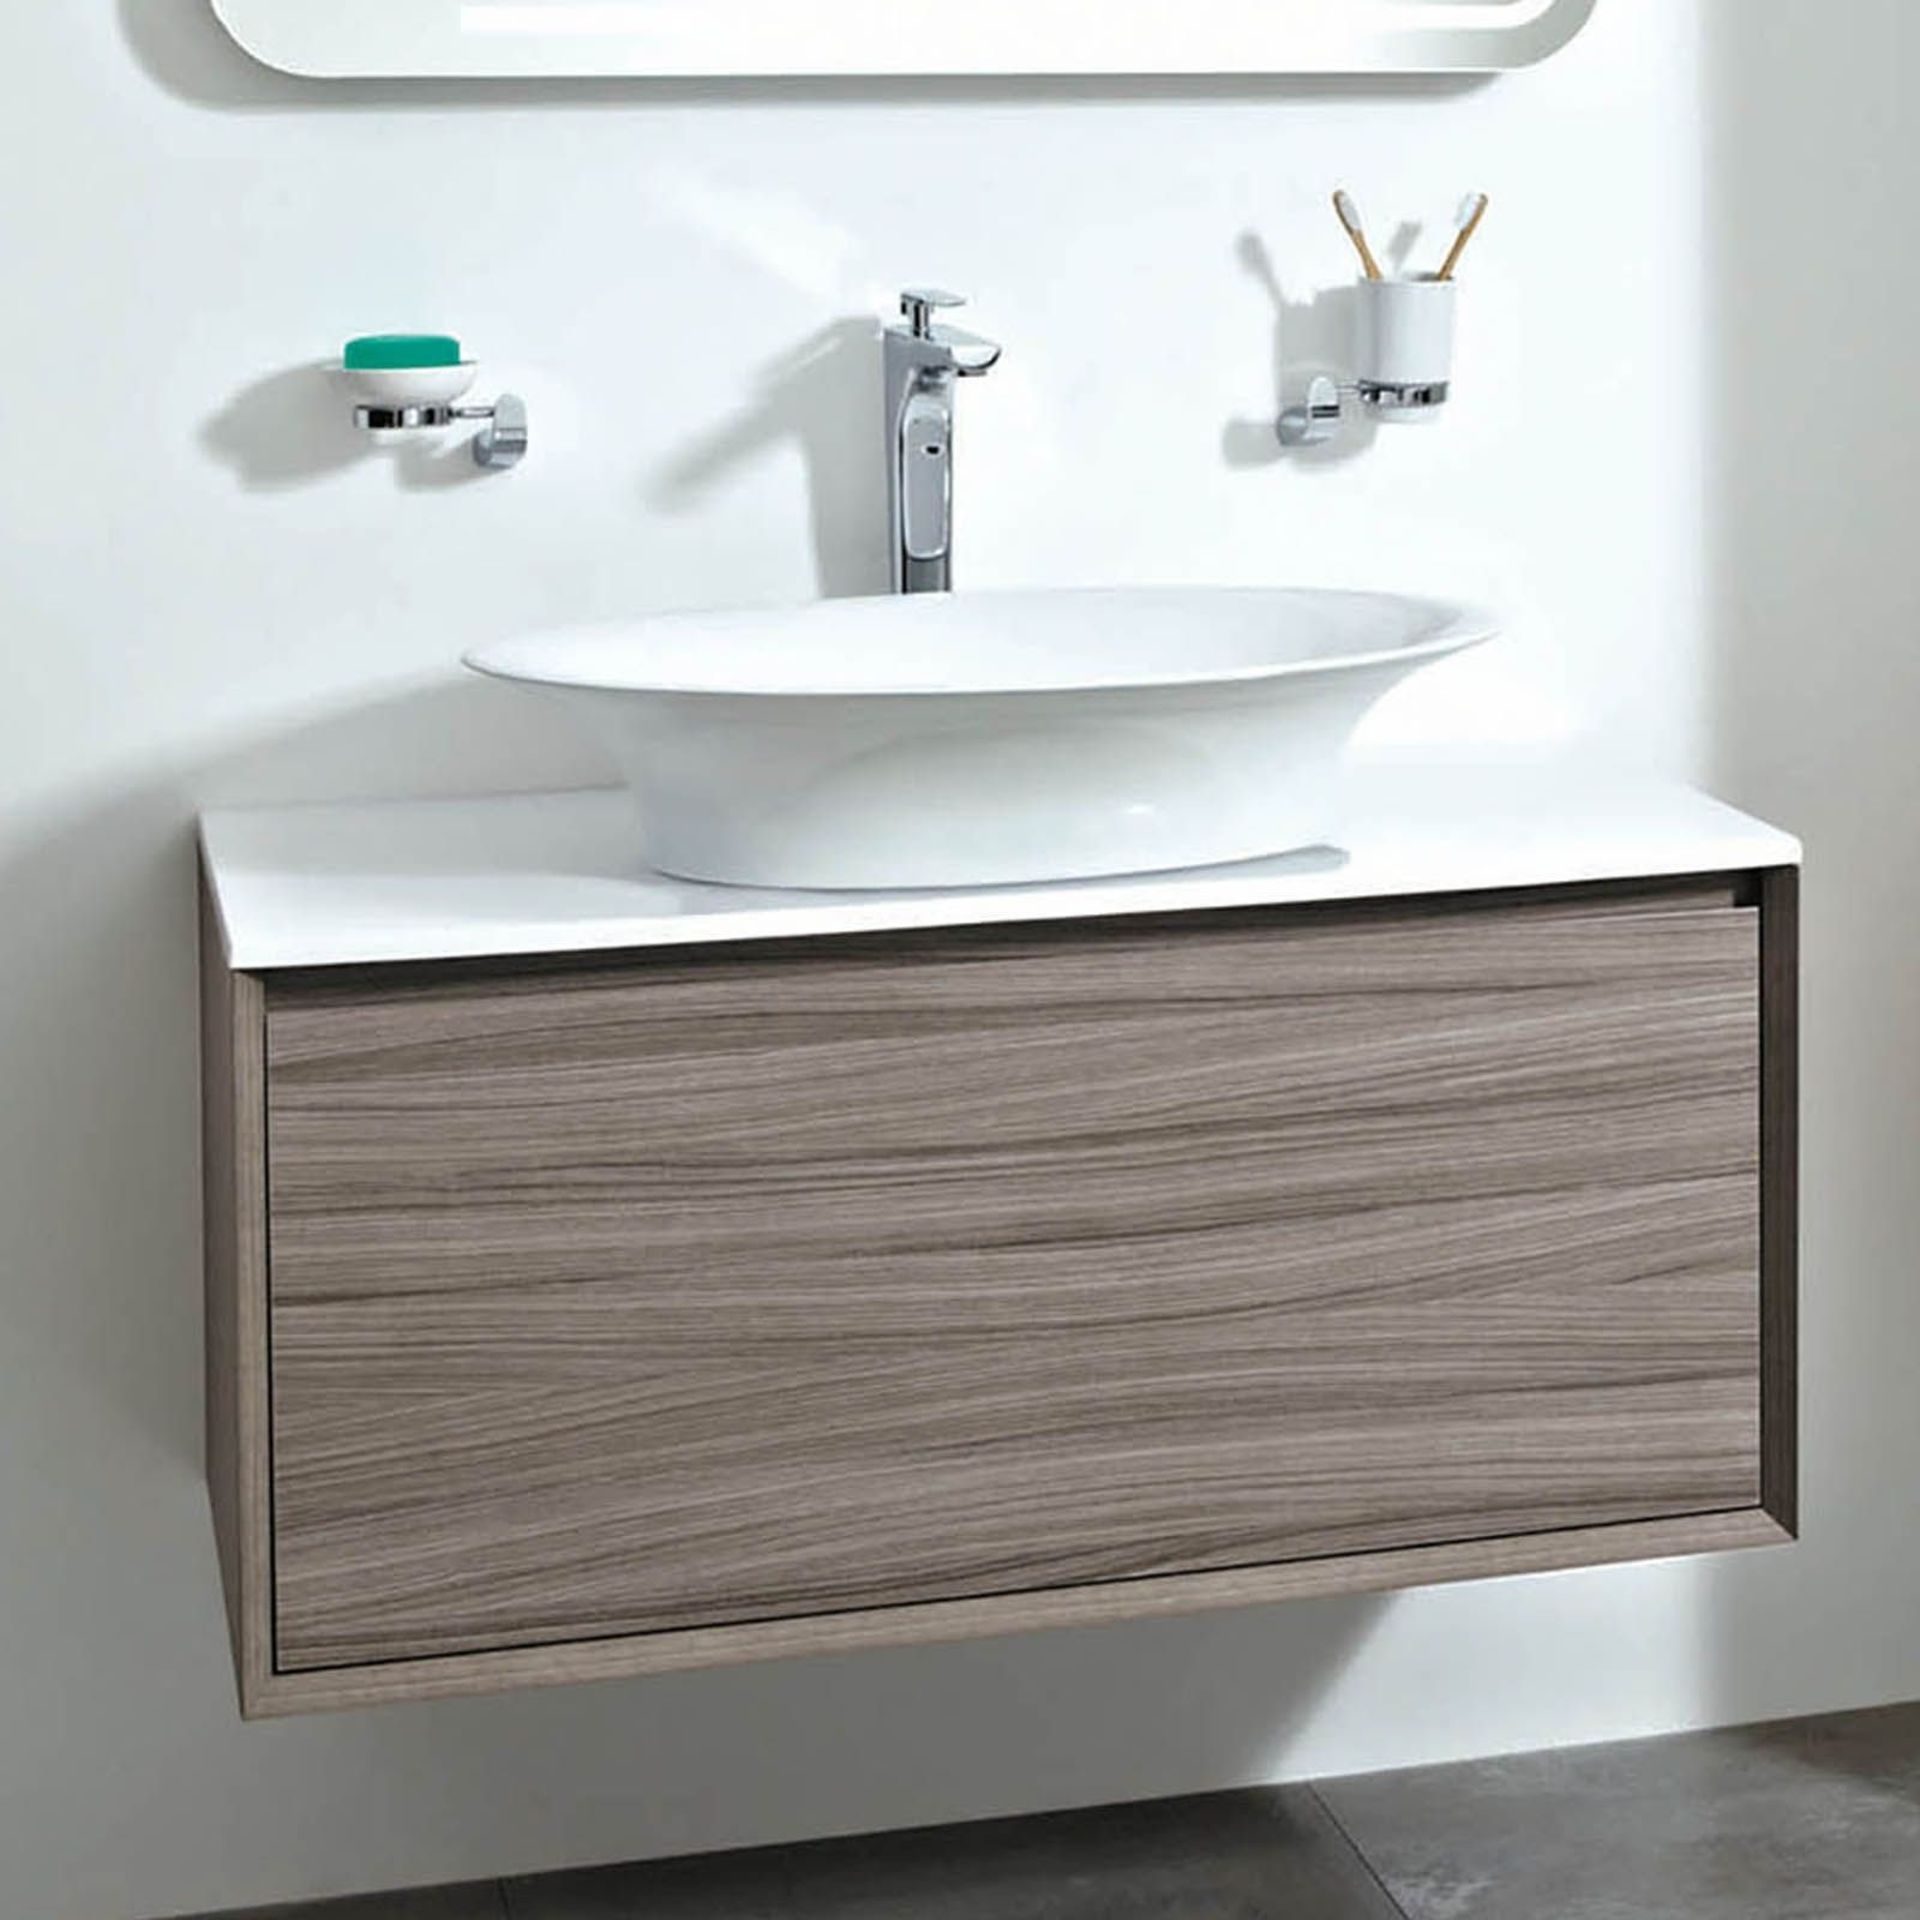 Enzo 1000 x 457 x 450mm designer wall hung vanity unit in Nilo finish with sparkling white solid su